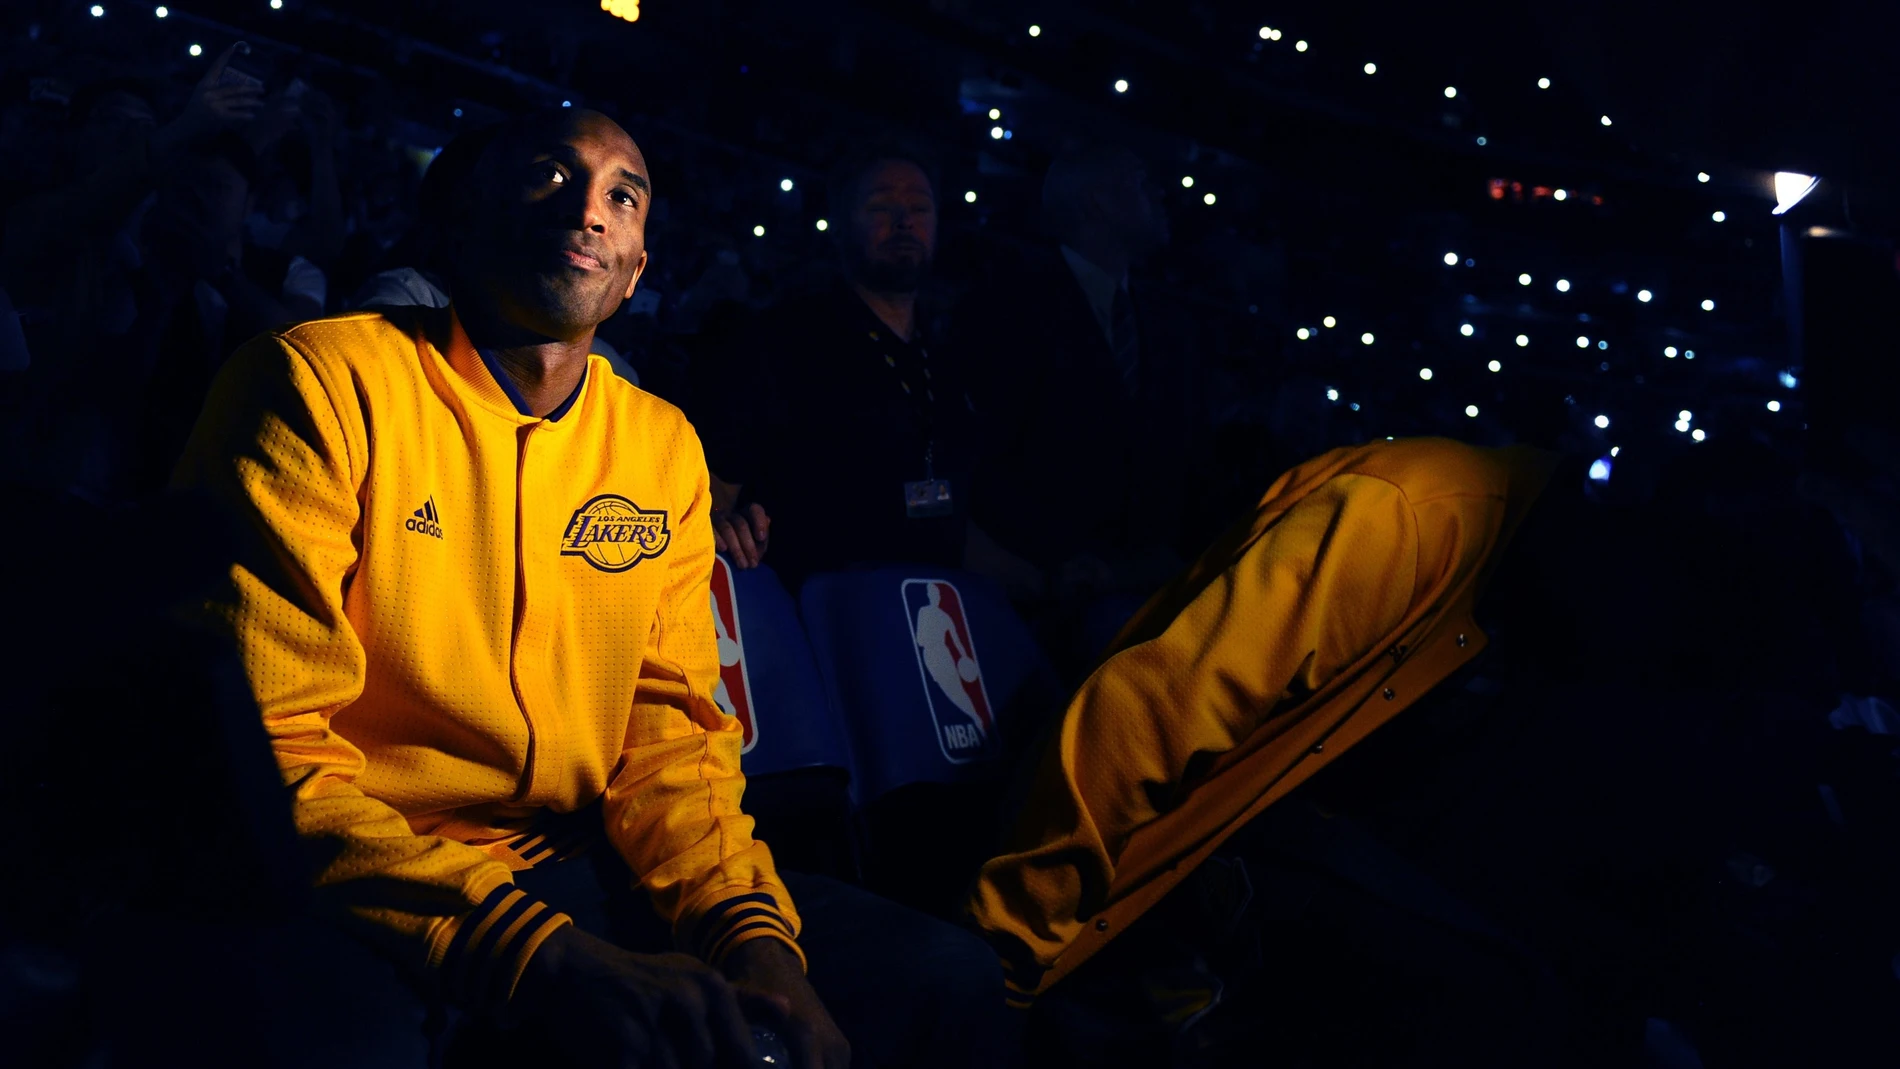 Kobe Bryant wins last game with Lakers